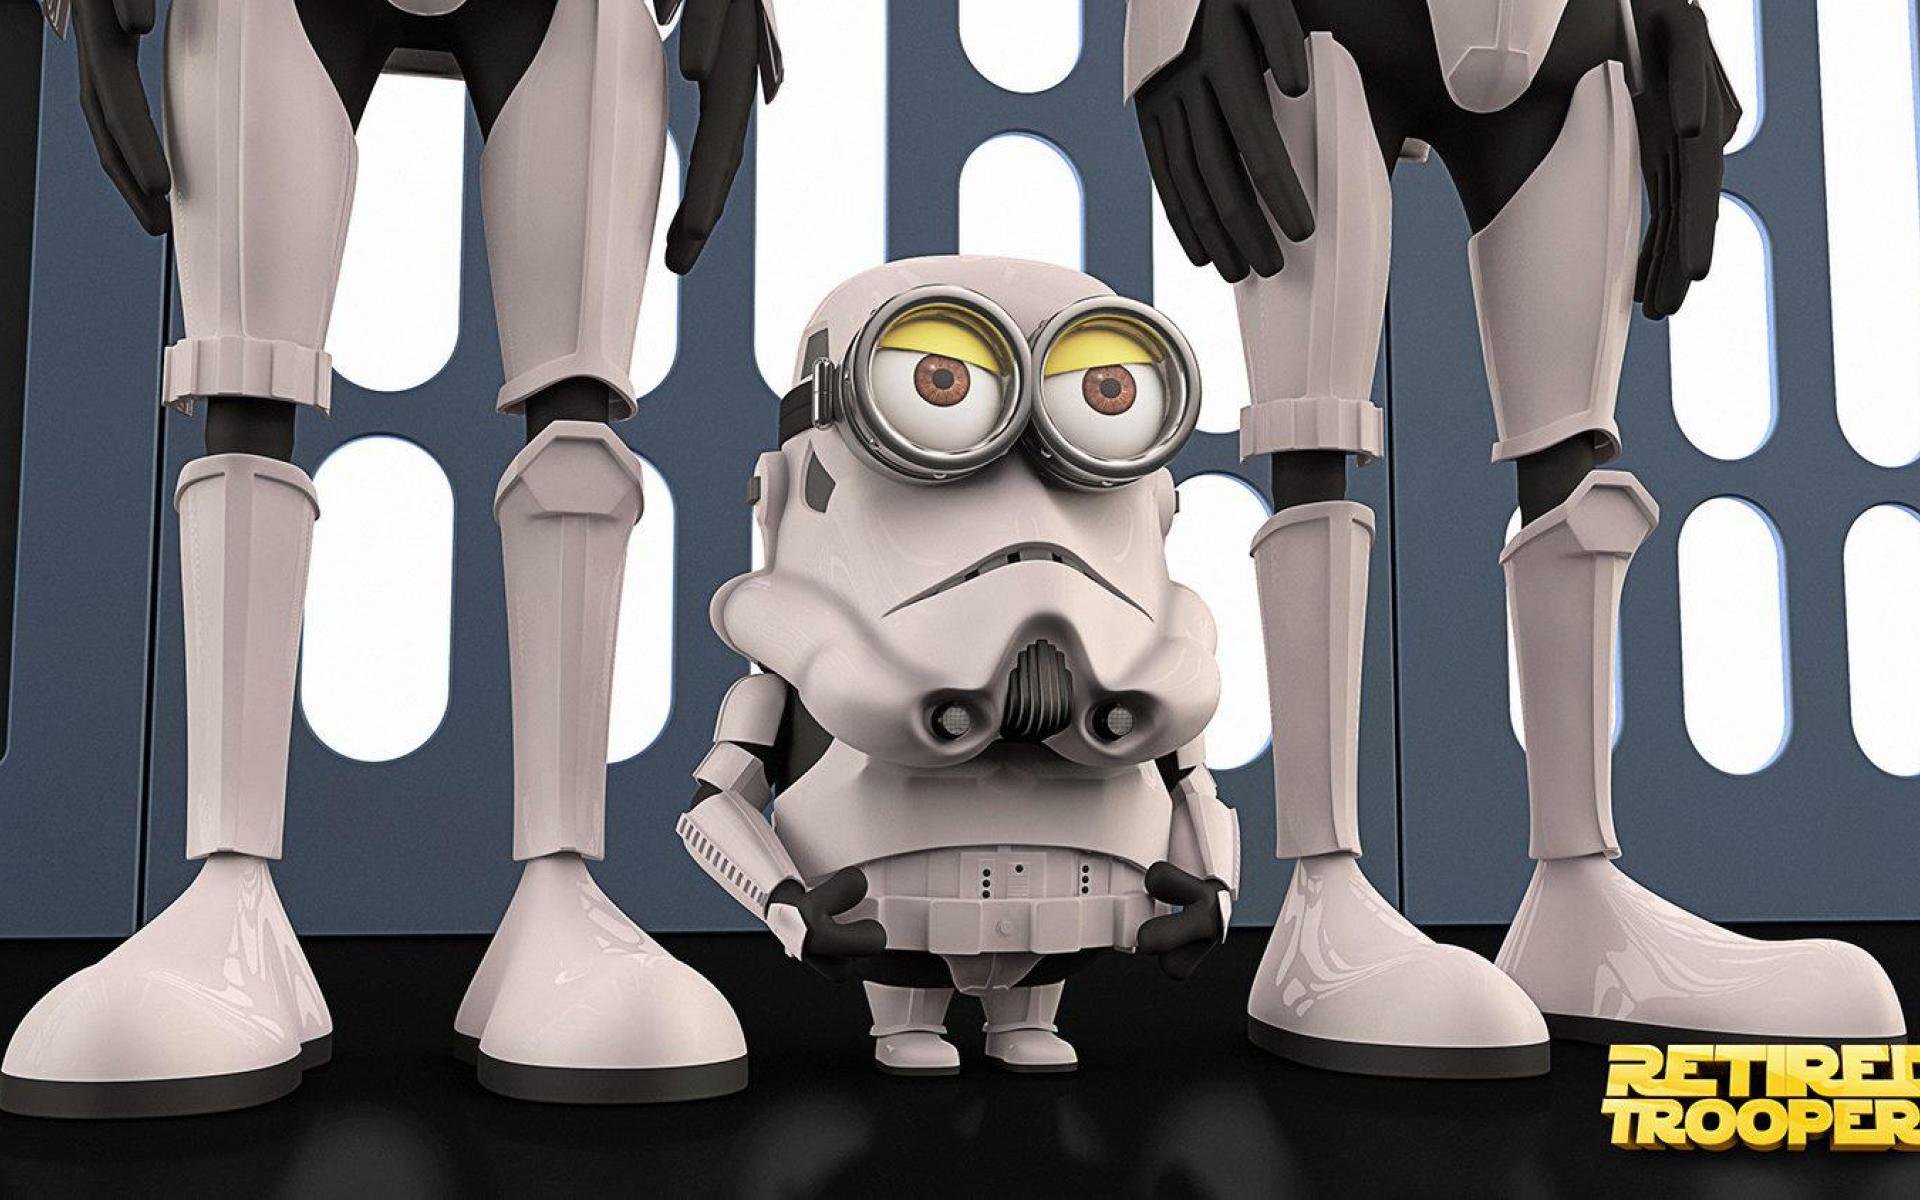 New Minions Hd Wallpapers - Despicable Me Minions Star Wars - HD Wallpaper 